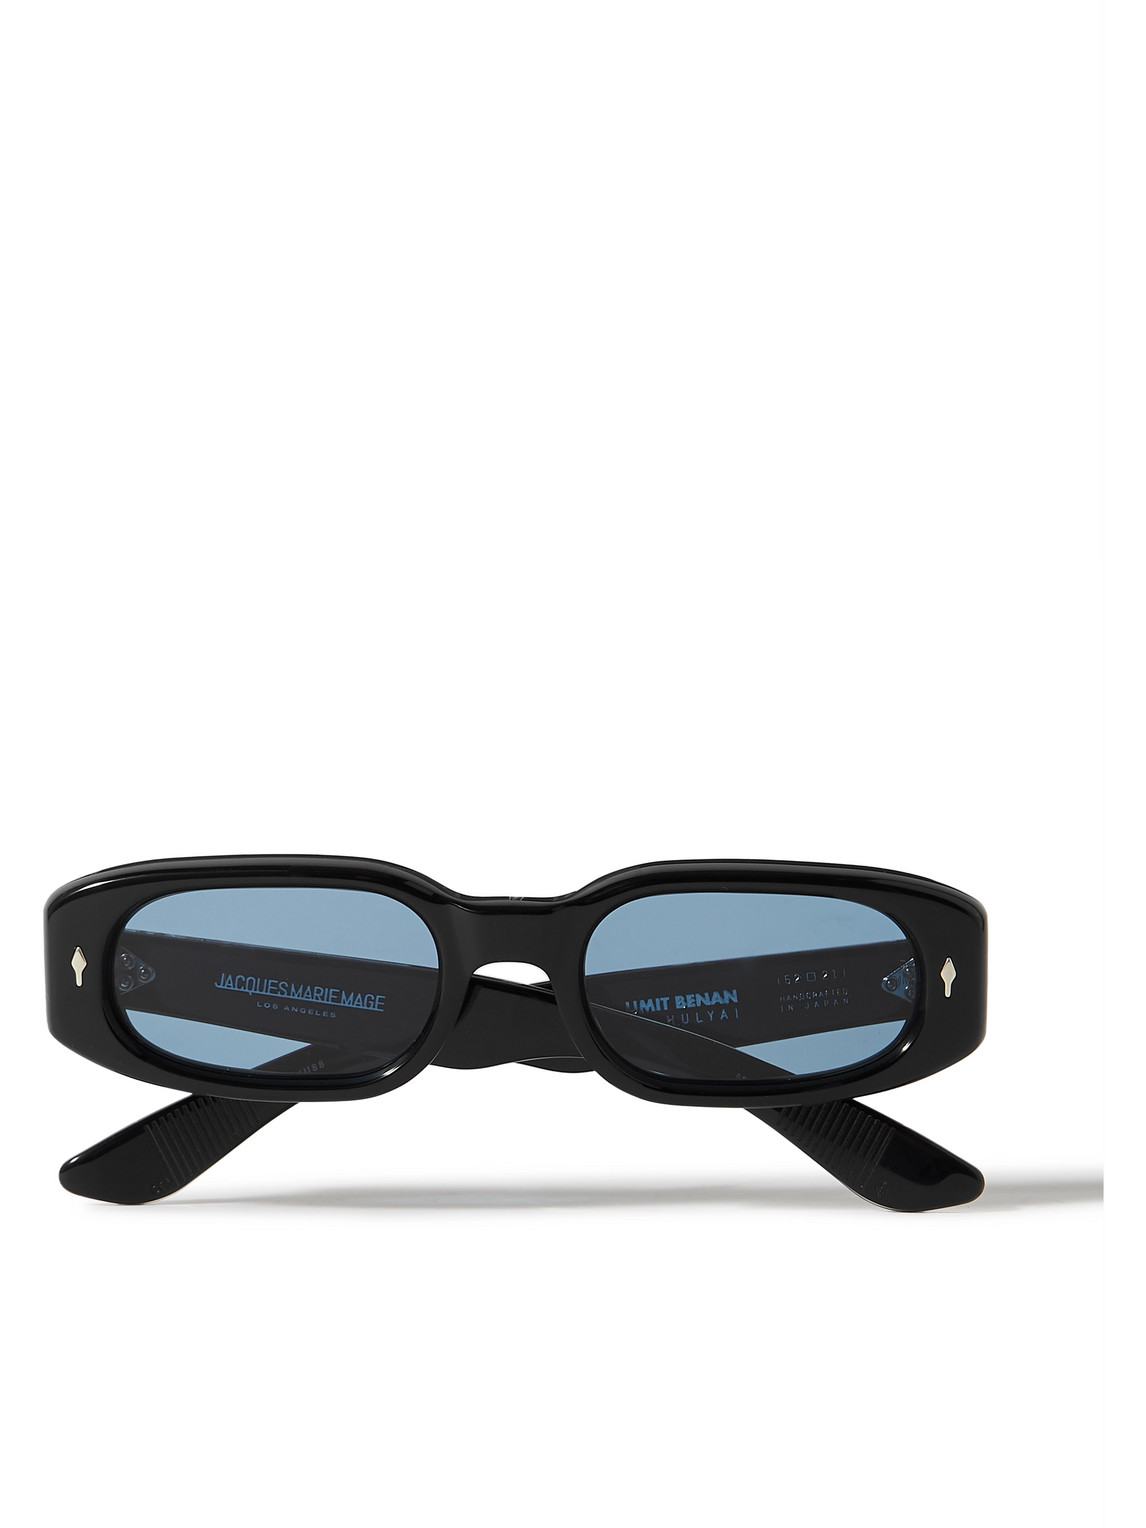 Jacques Marie Mage Umit Benan Hulya Oval-frame Acetate Sunglasses In Black